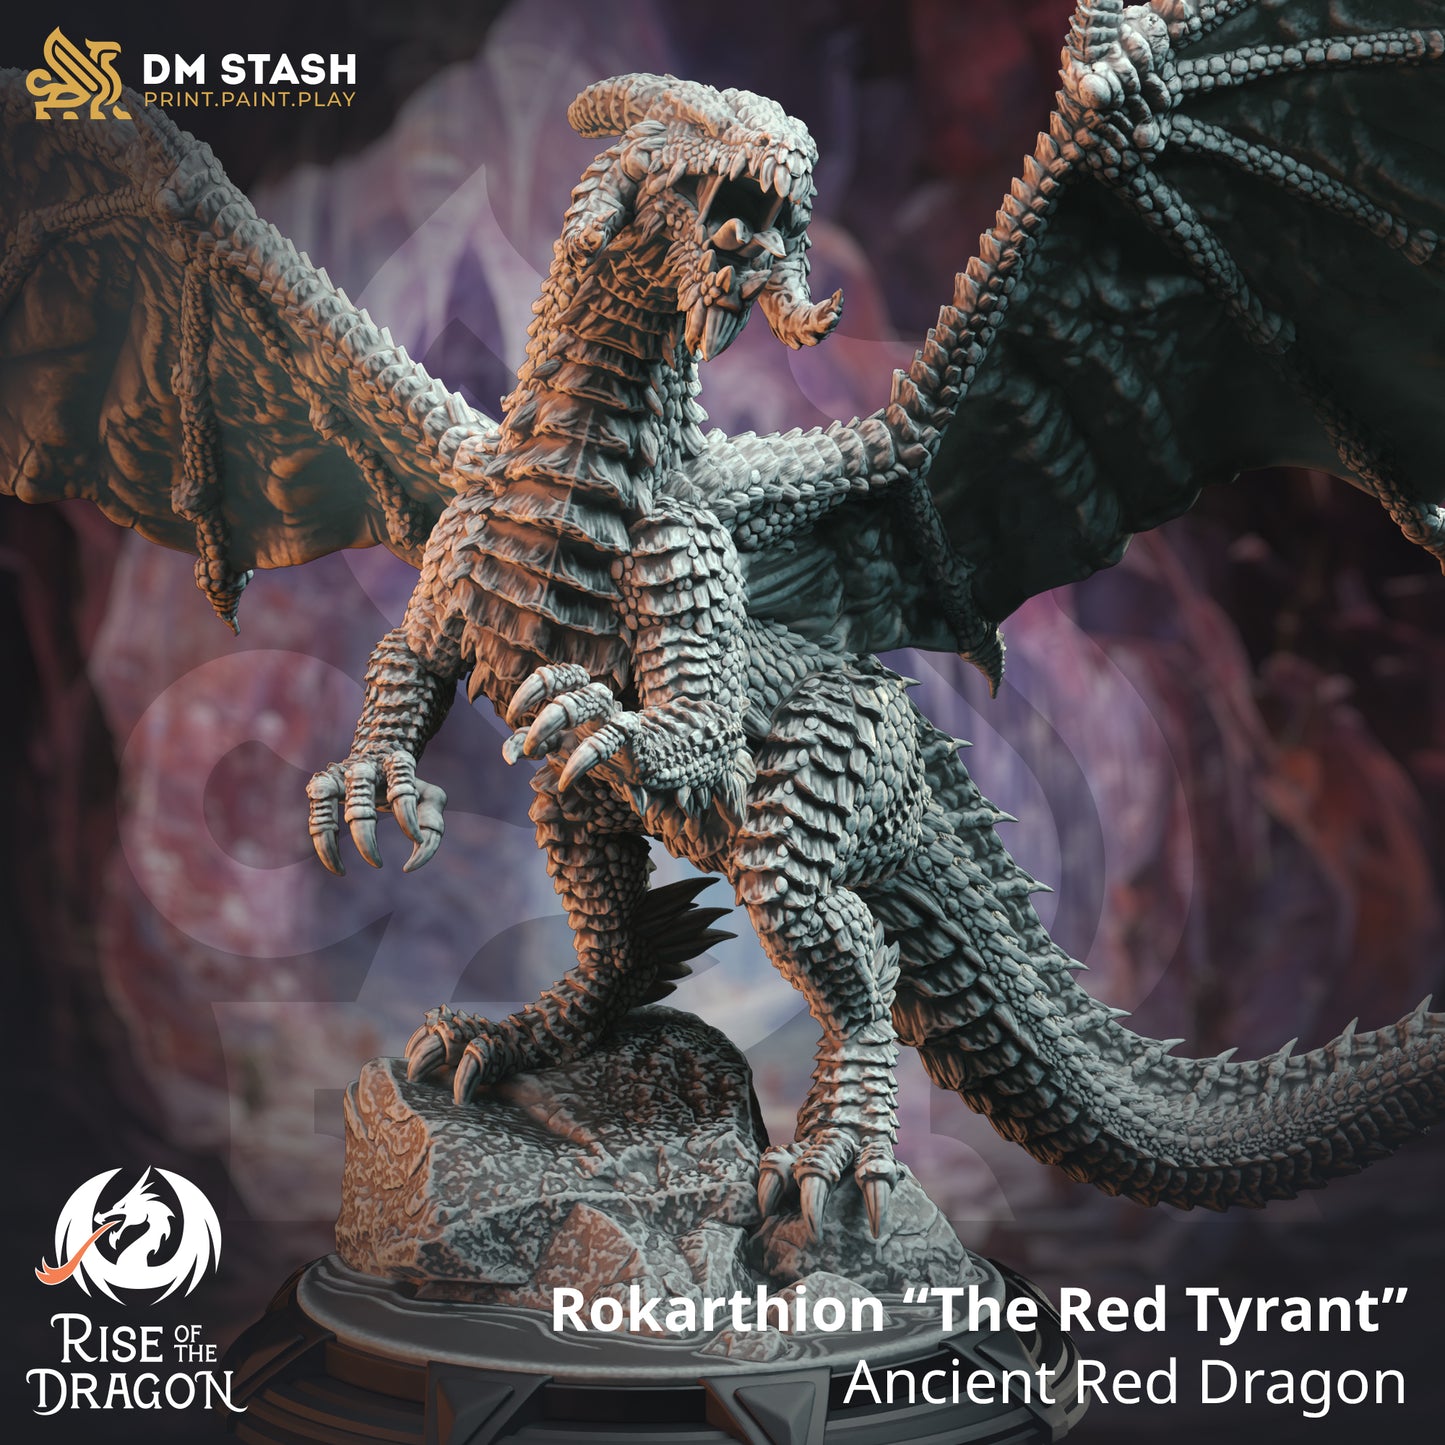 Rokarthion “The Red Tyrant” - Ancient Red Dragon